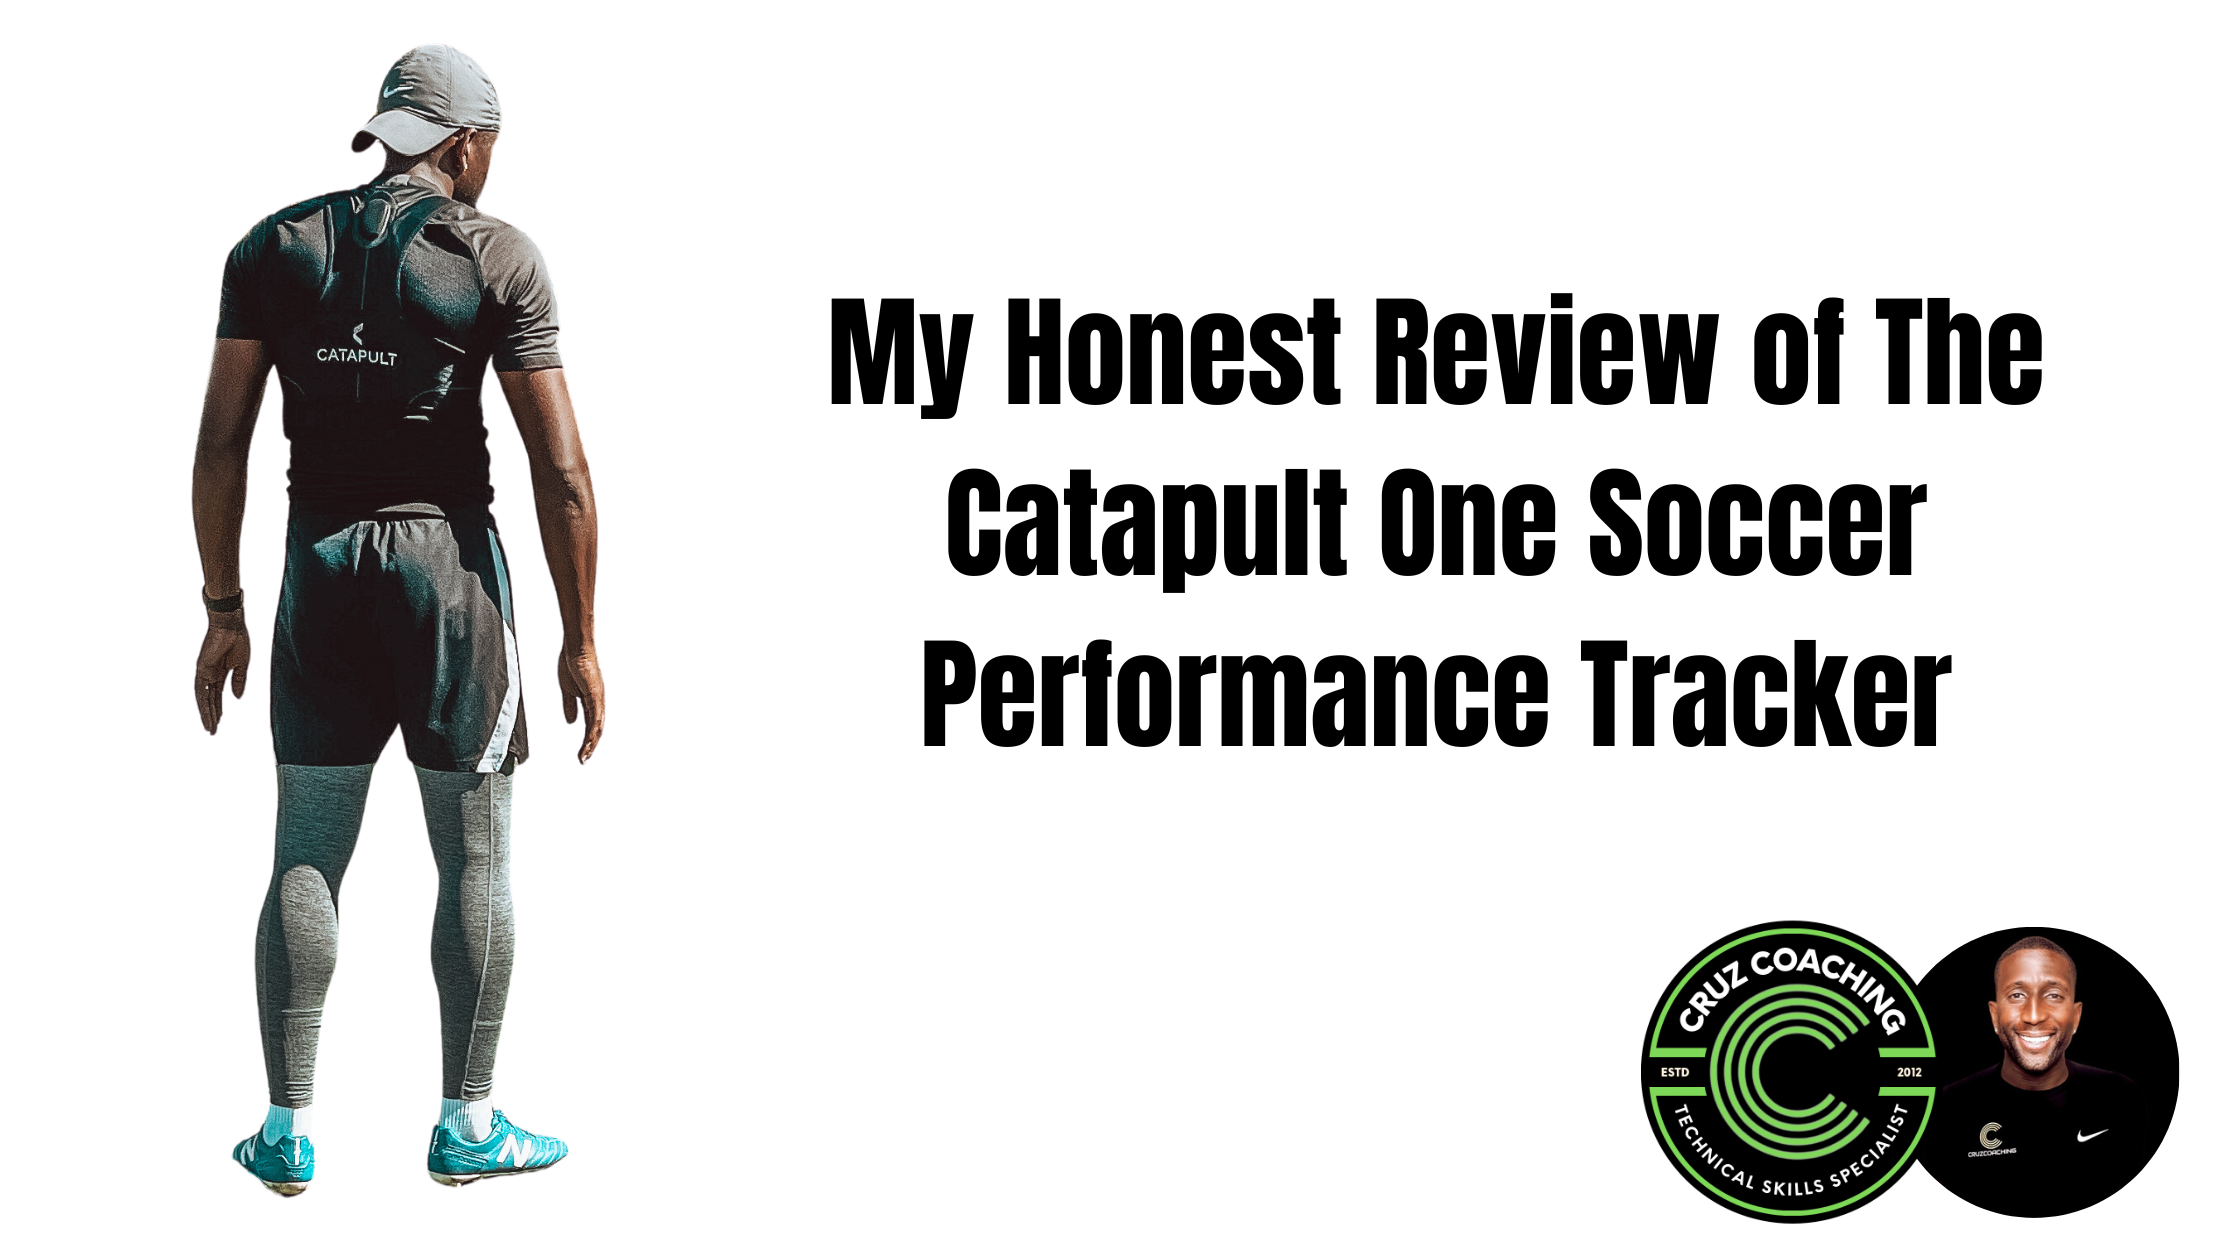 My Honest Review of The Catapult One Soccer Performance Tracker